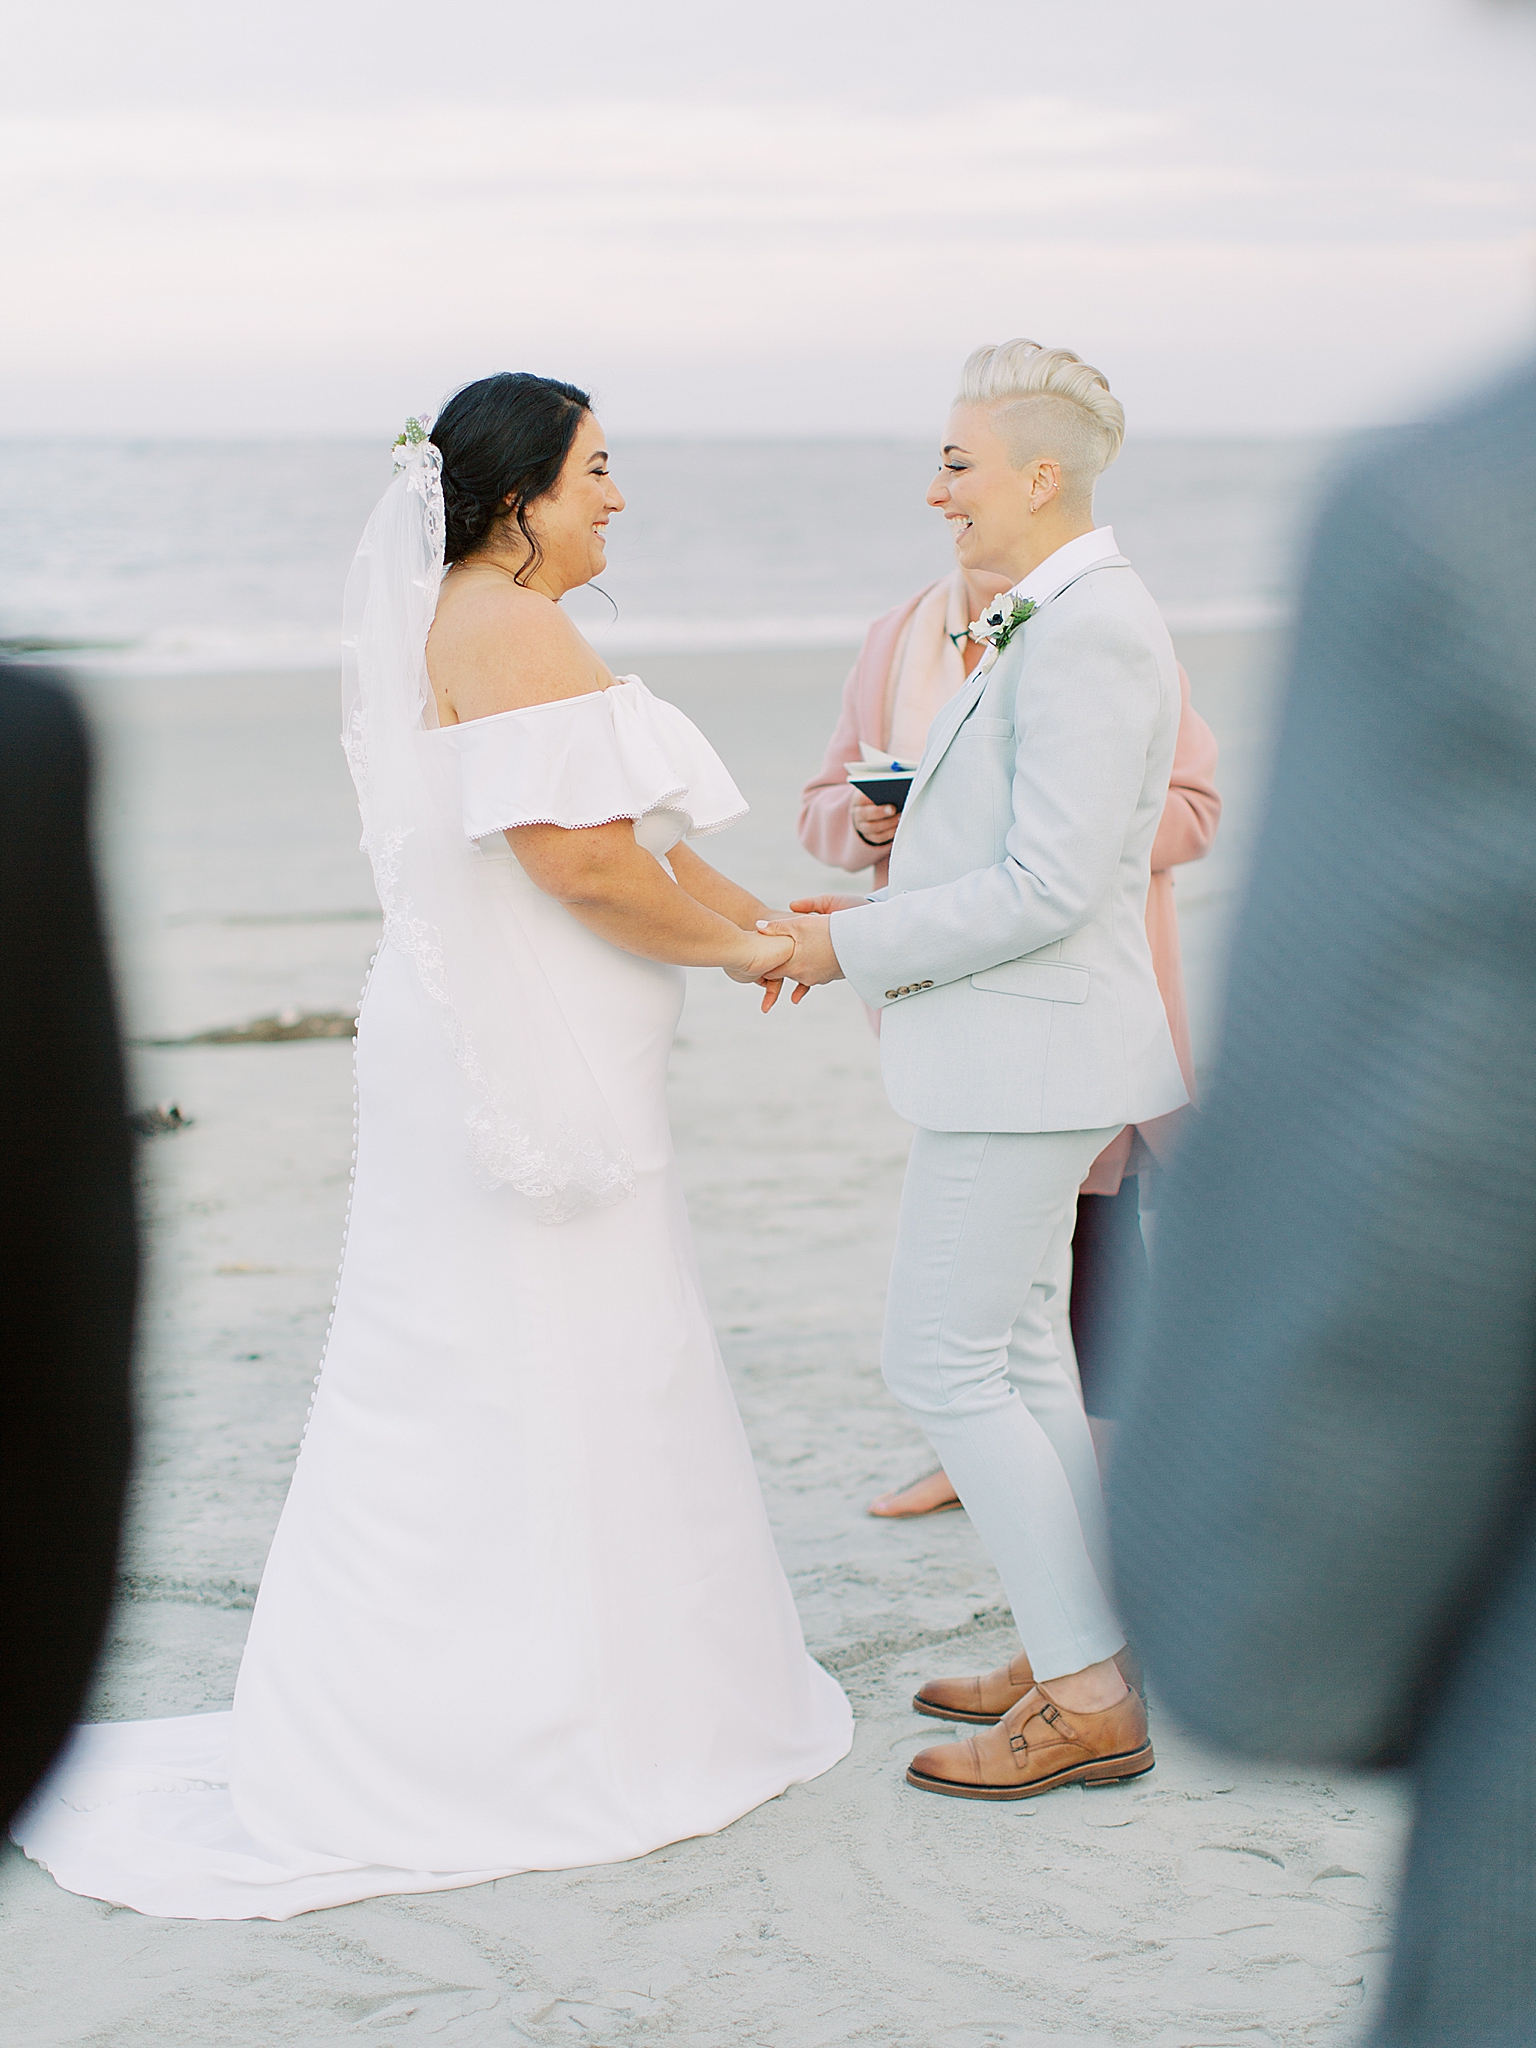 brides exchange vows during intimate Charleston Microwedding ceremony on the beach